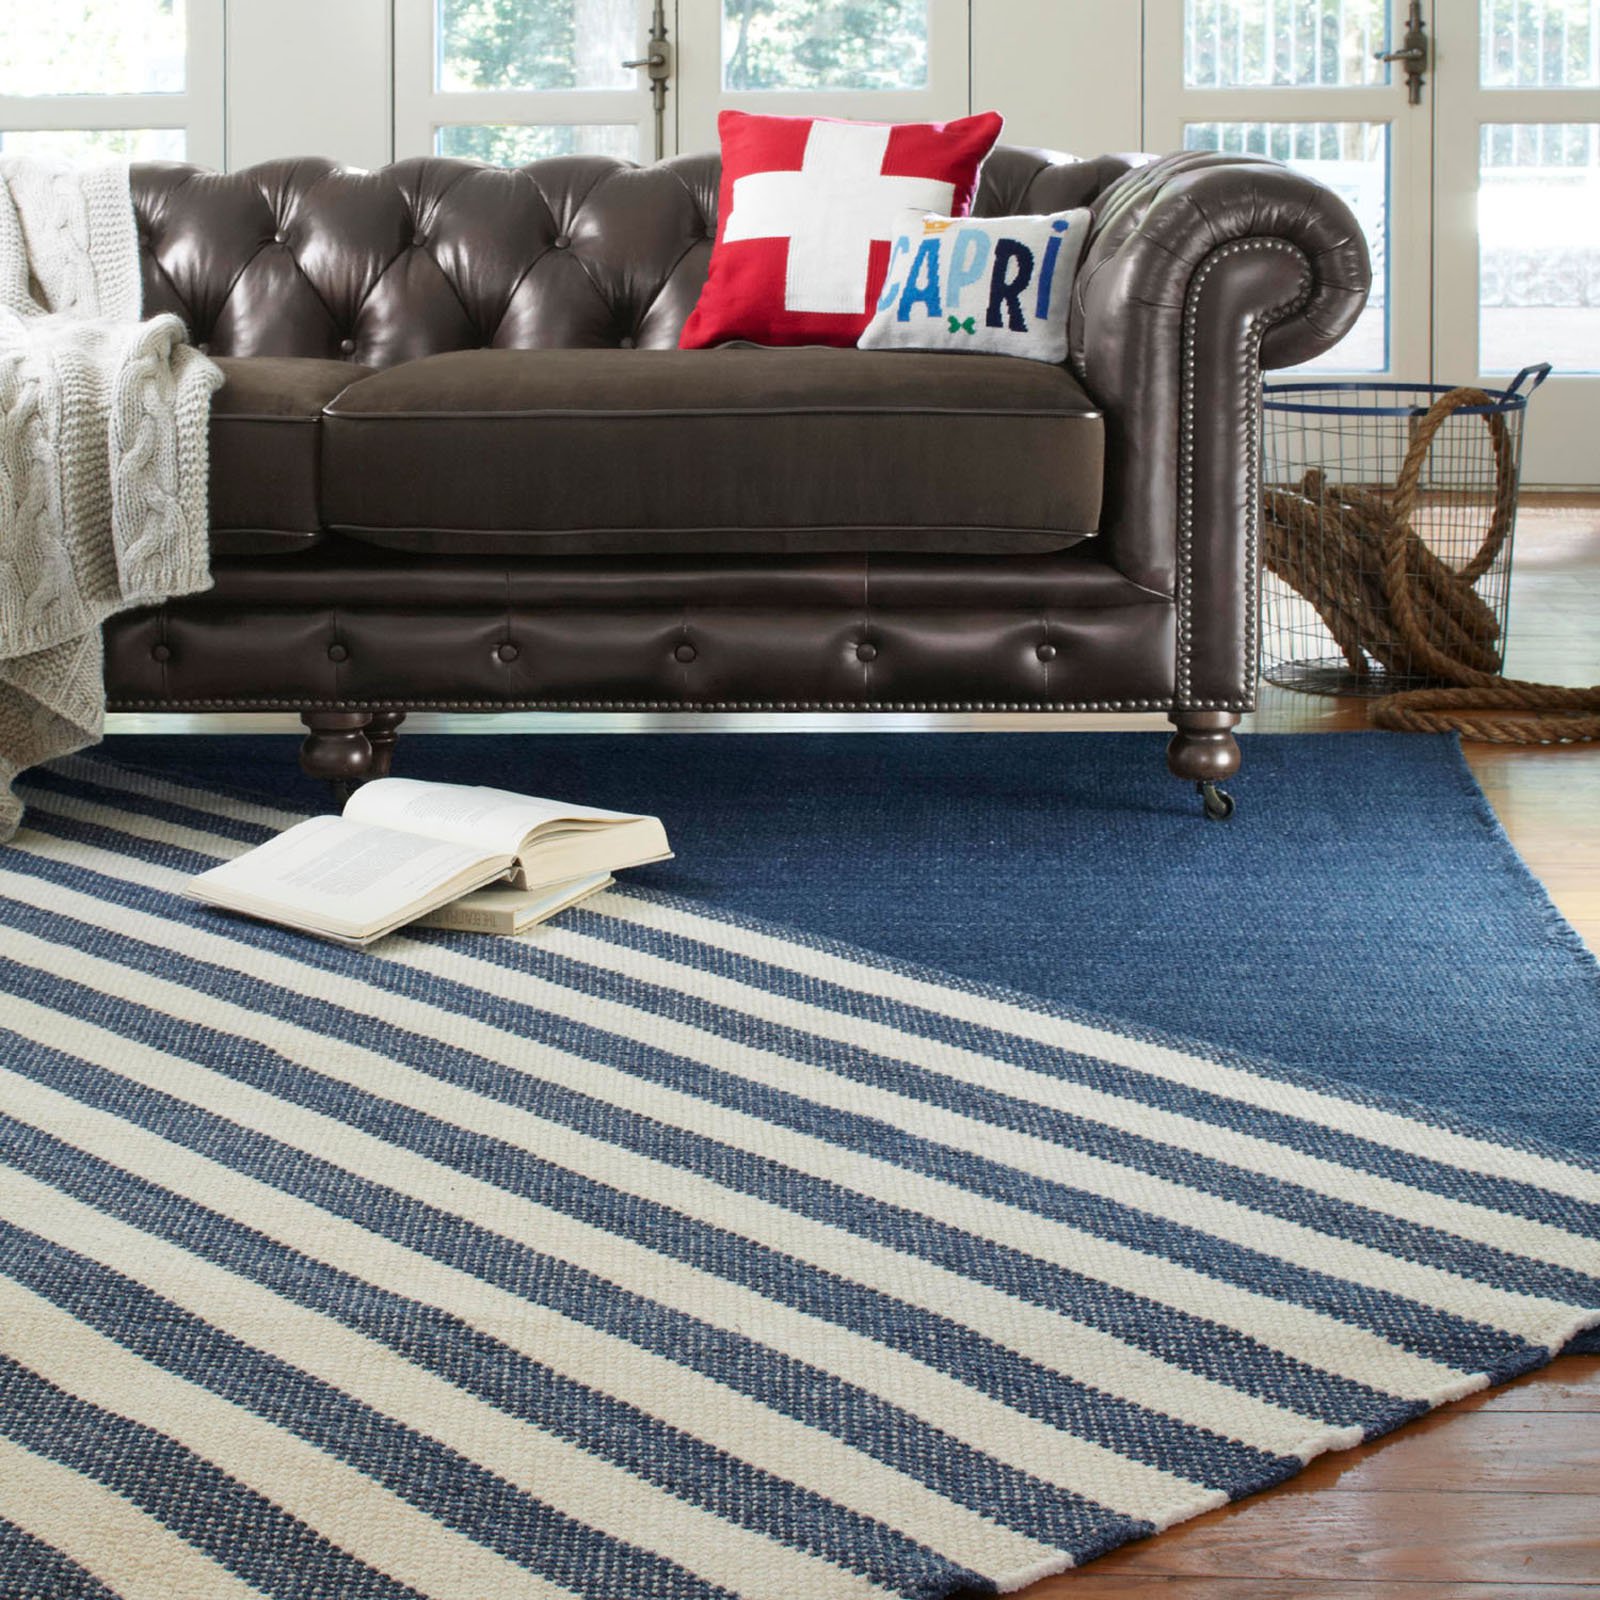 Capel Rugs - Nags Head Vertical Stripe Rectangle Flat Woven Rugs - image 3 of 3